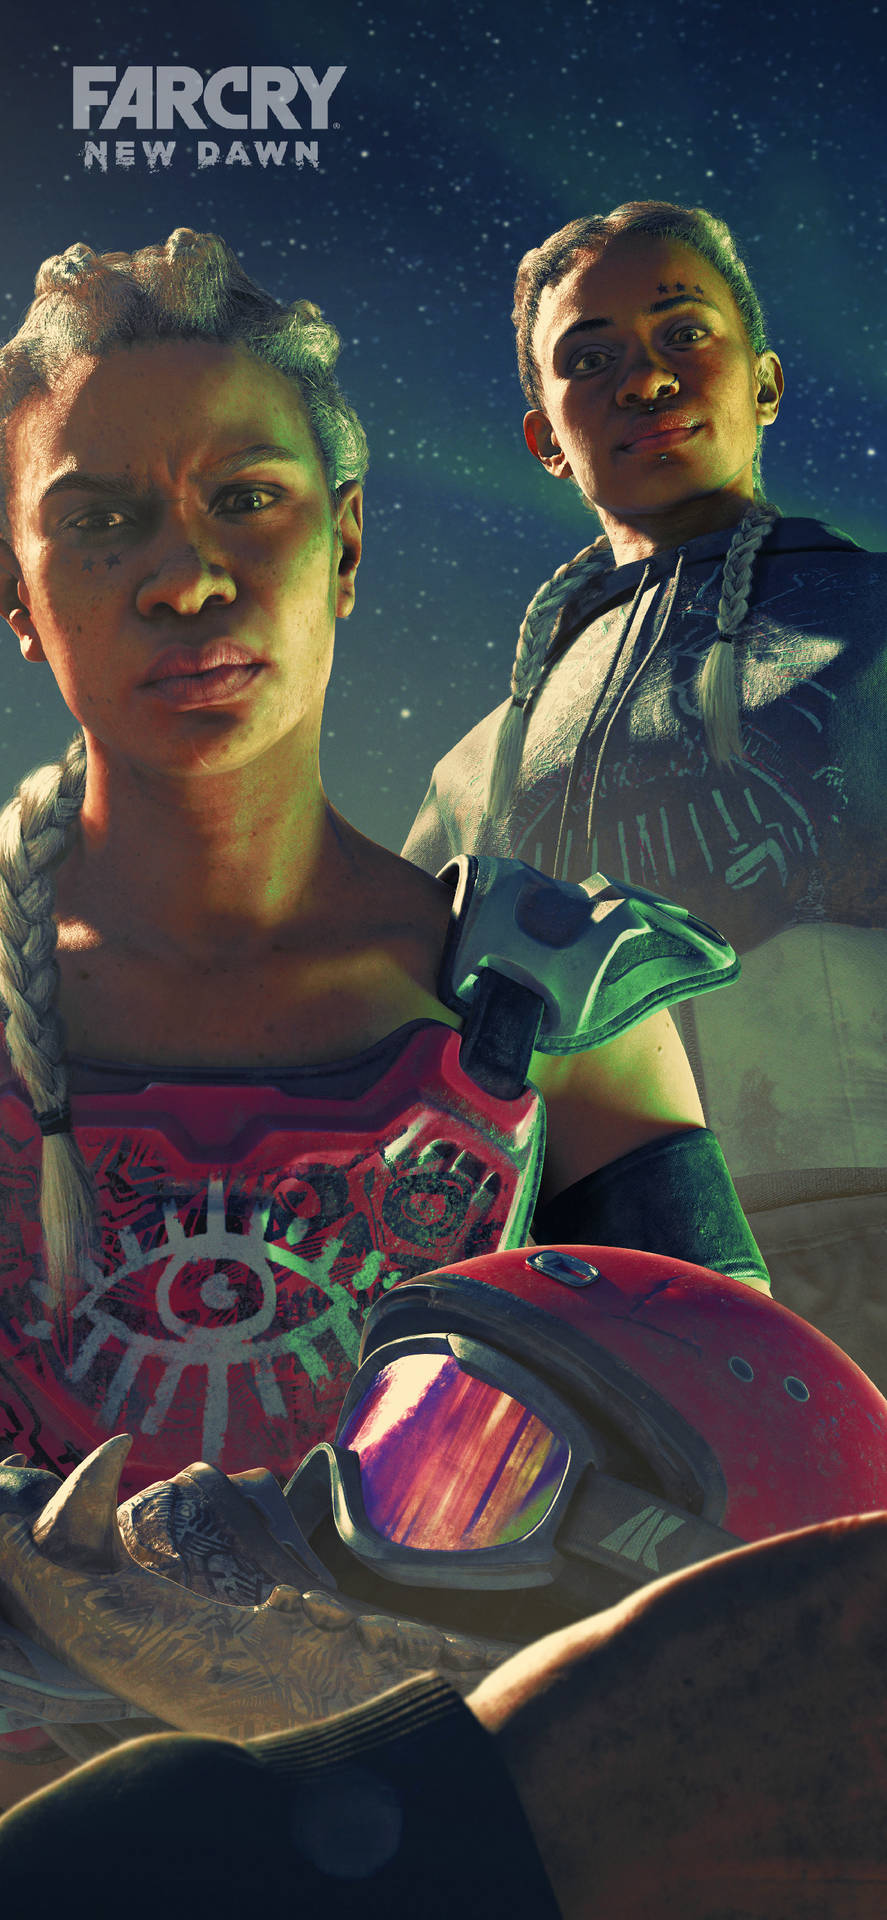 Twin Sisters Far Cry Iphone Wallpaper